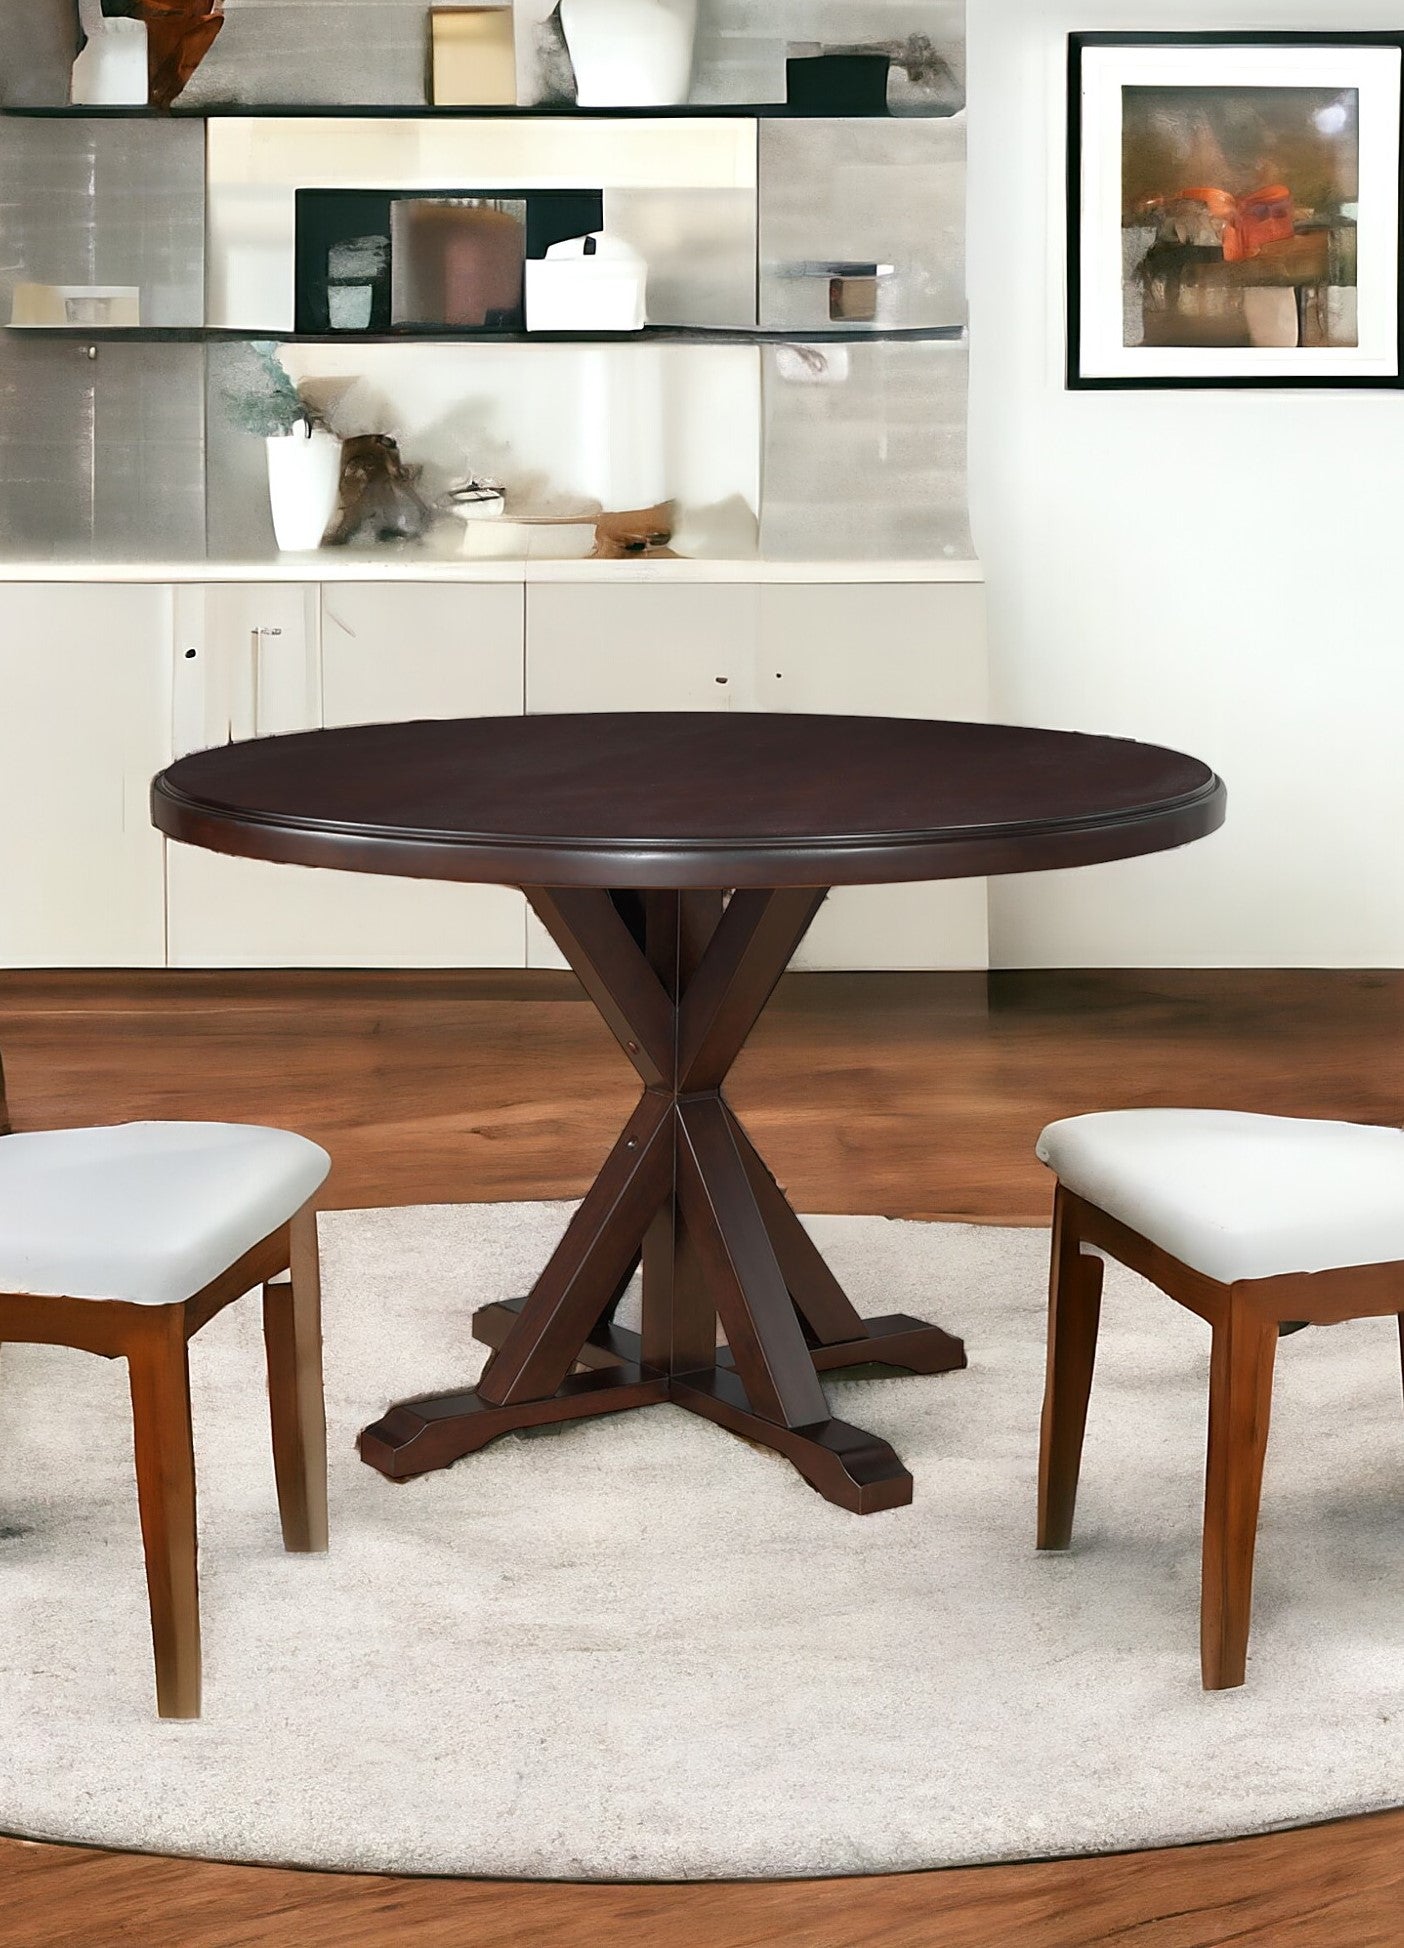 48" Espresso Rounded Solid Manufactured Wood Pedestal Base Dining Table